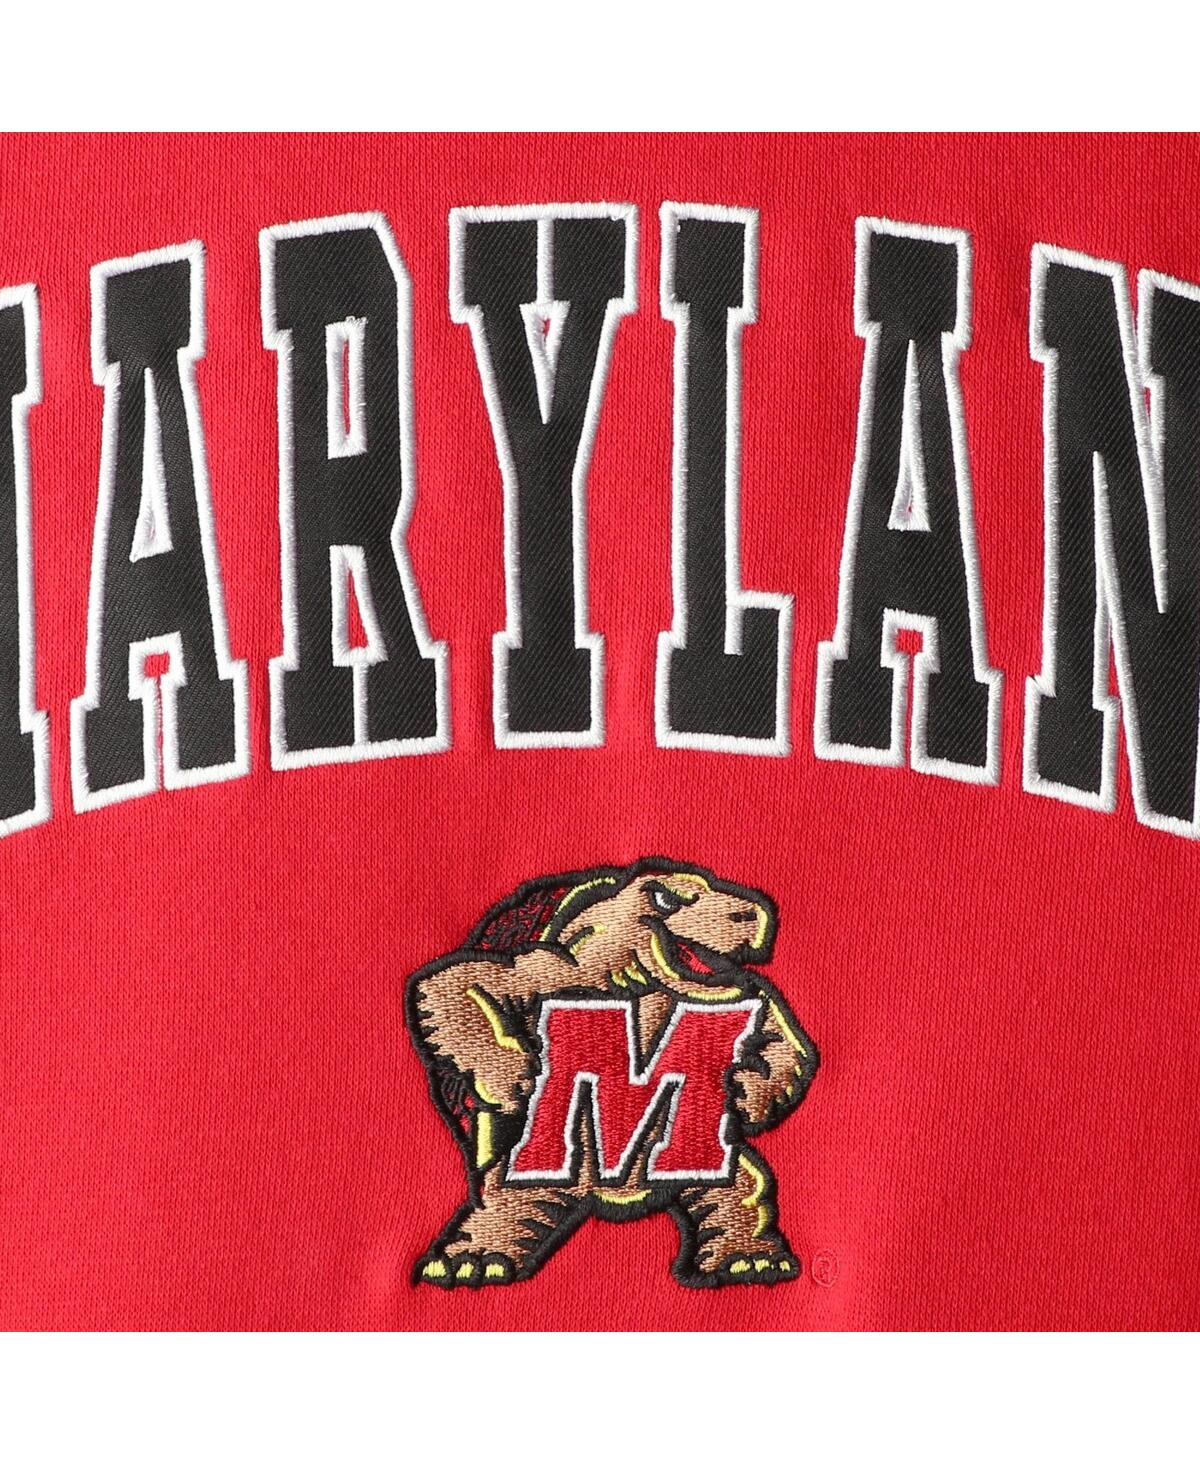 Shop Colosseum Big Boys  Red Maryland Terrapins 2-hit Team Pullover Hoodie